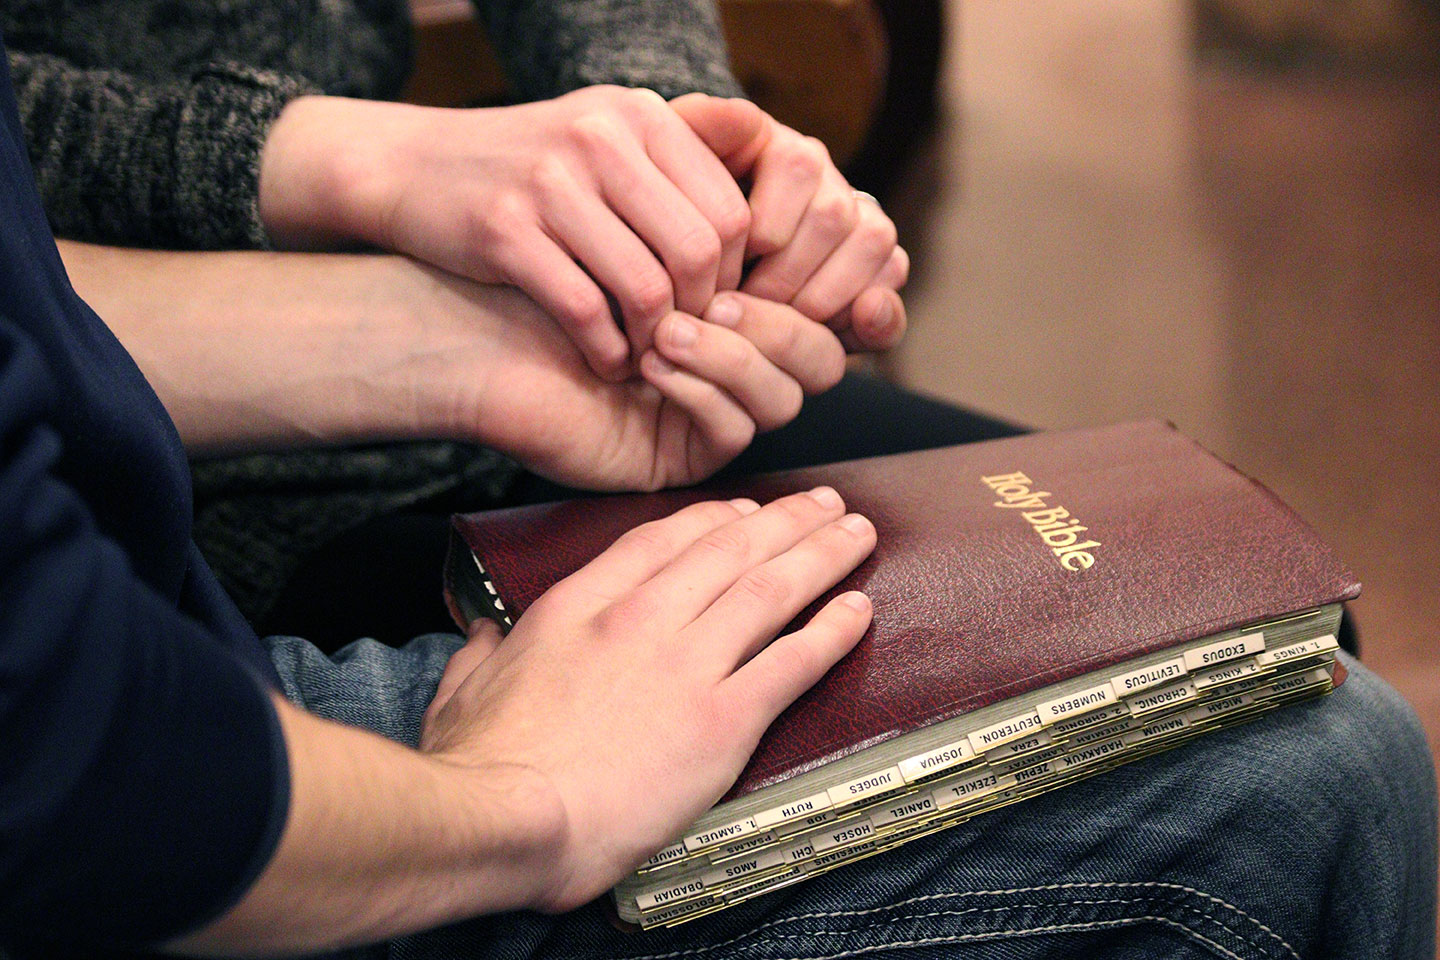 praying with hand on bible